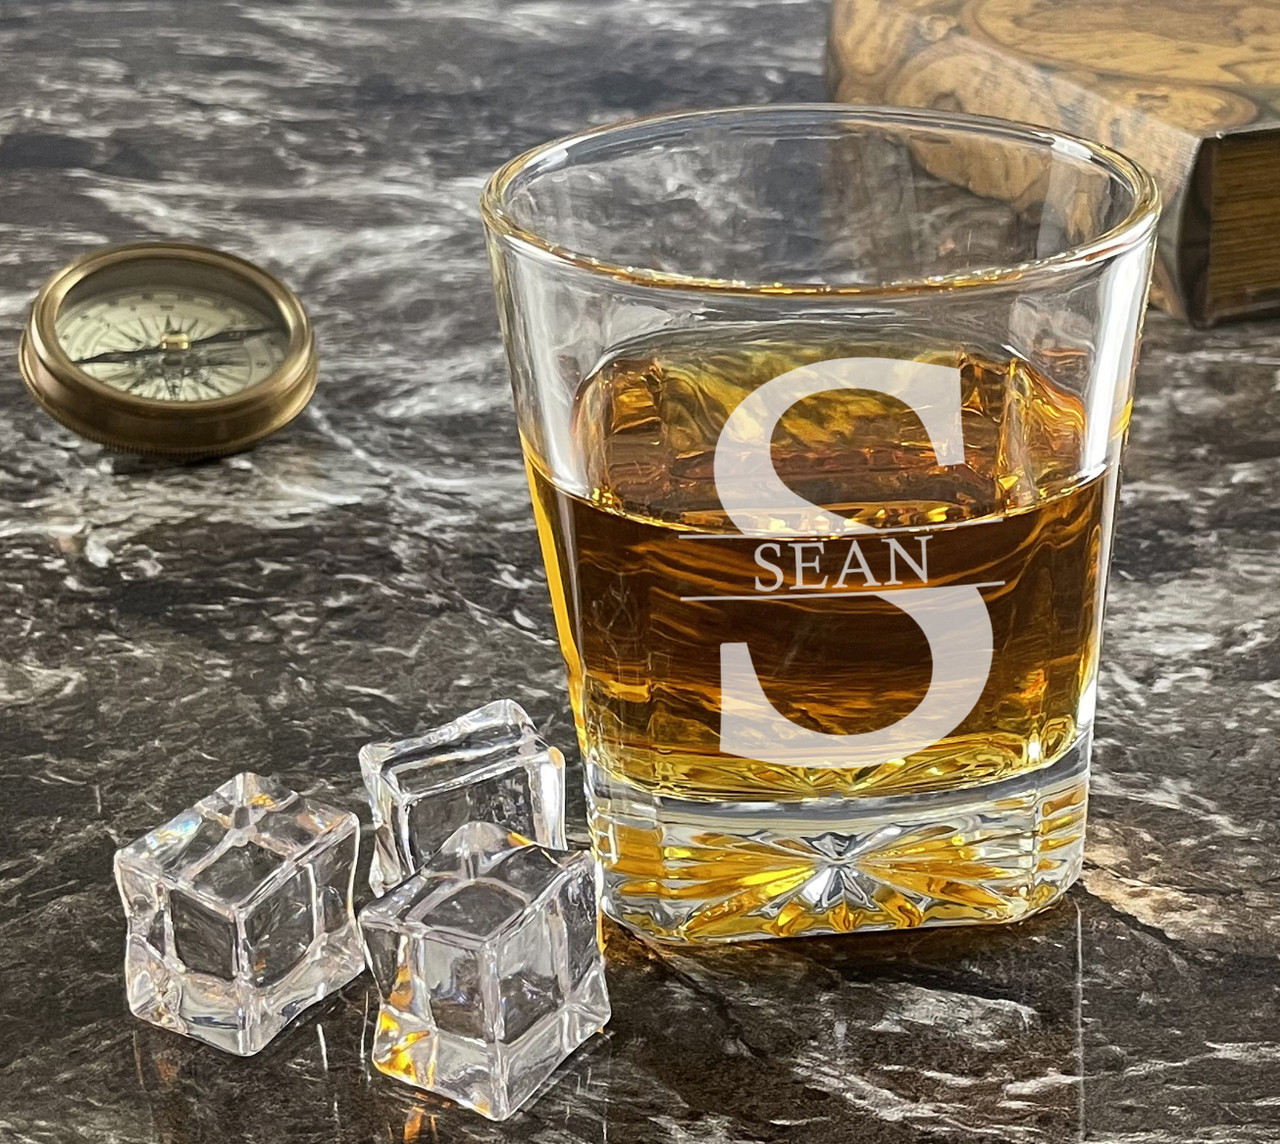 https://cdn11.bigcommerce.com/s-c2cnzobee/images/stencil/1280x1280/products/296/3678/Charleston_Square_Whiskey_Glass__91807.1684609358.jpg?c=2